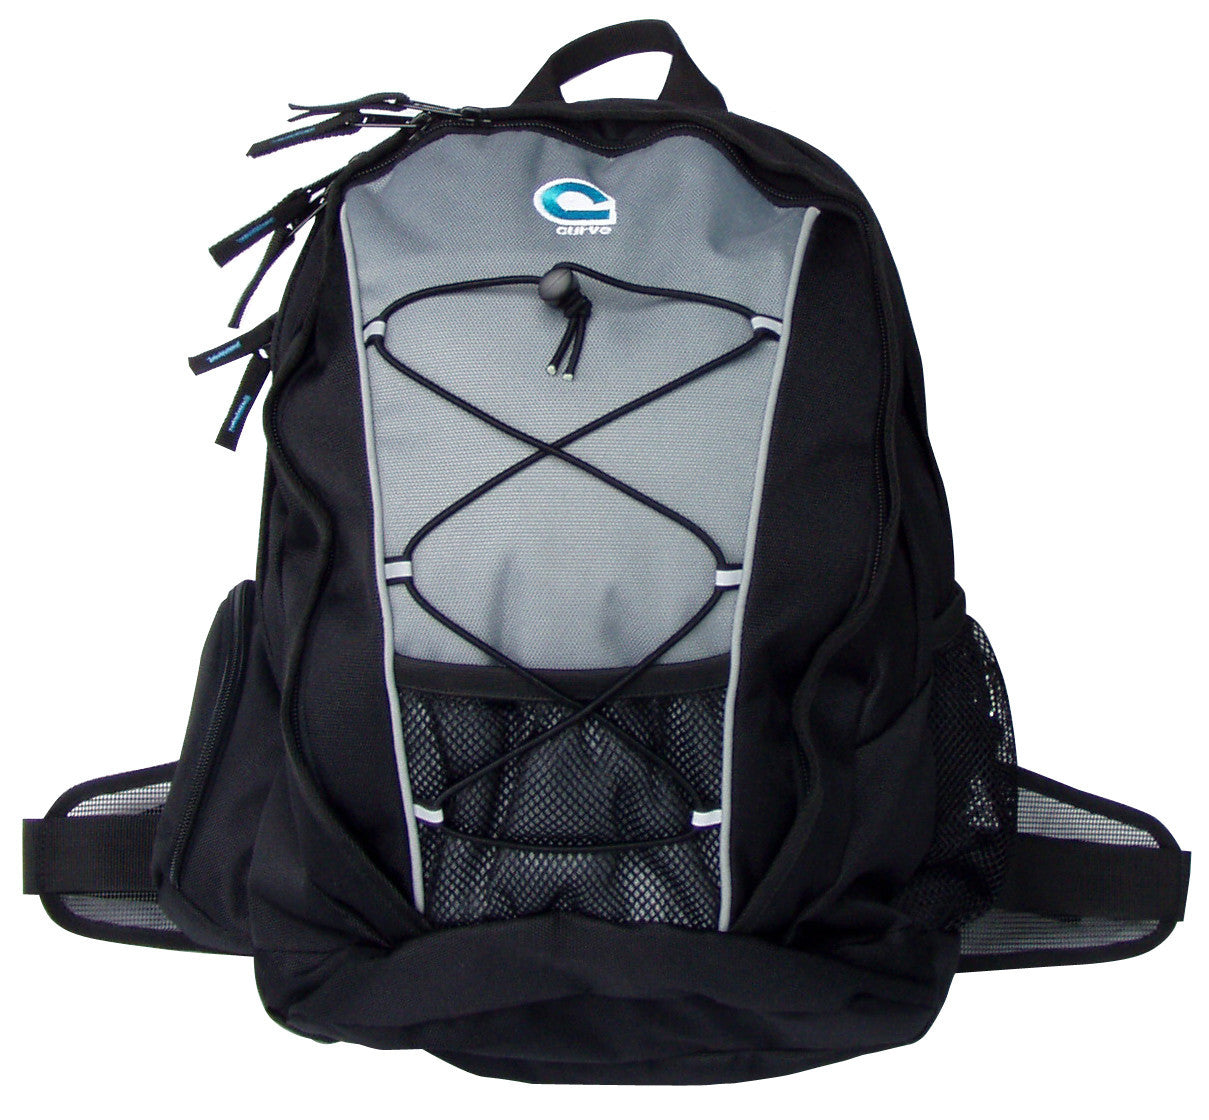 surf backpacks  Curve Surfboard Accessories - United States